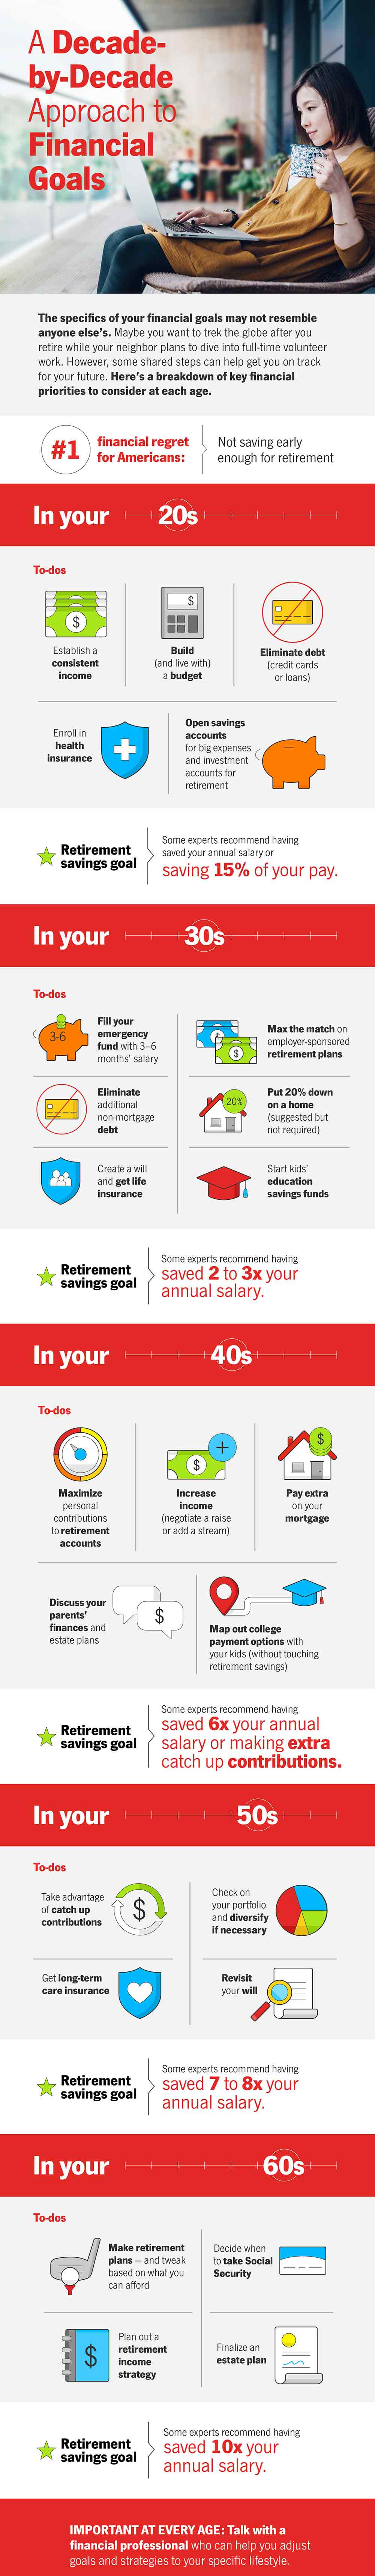 Infographic with a decade-to-decade approach to financial goals.